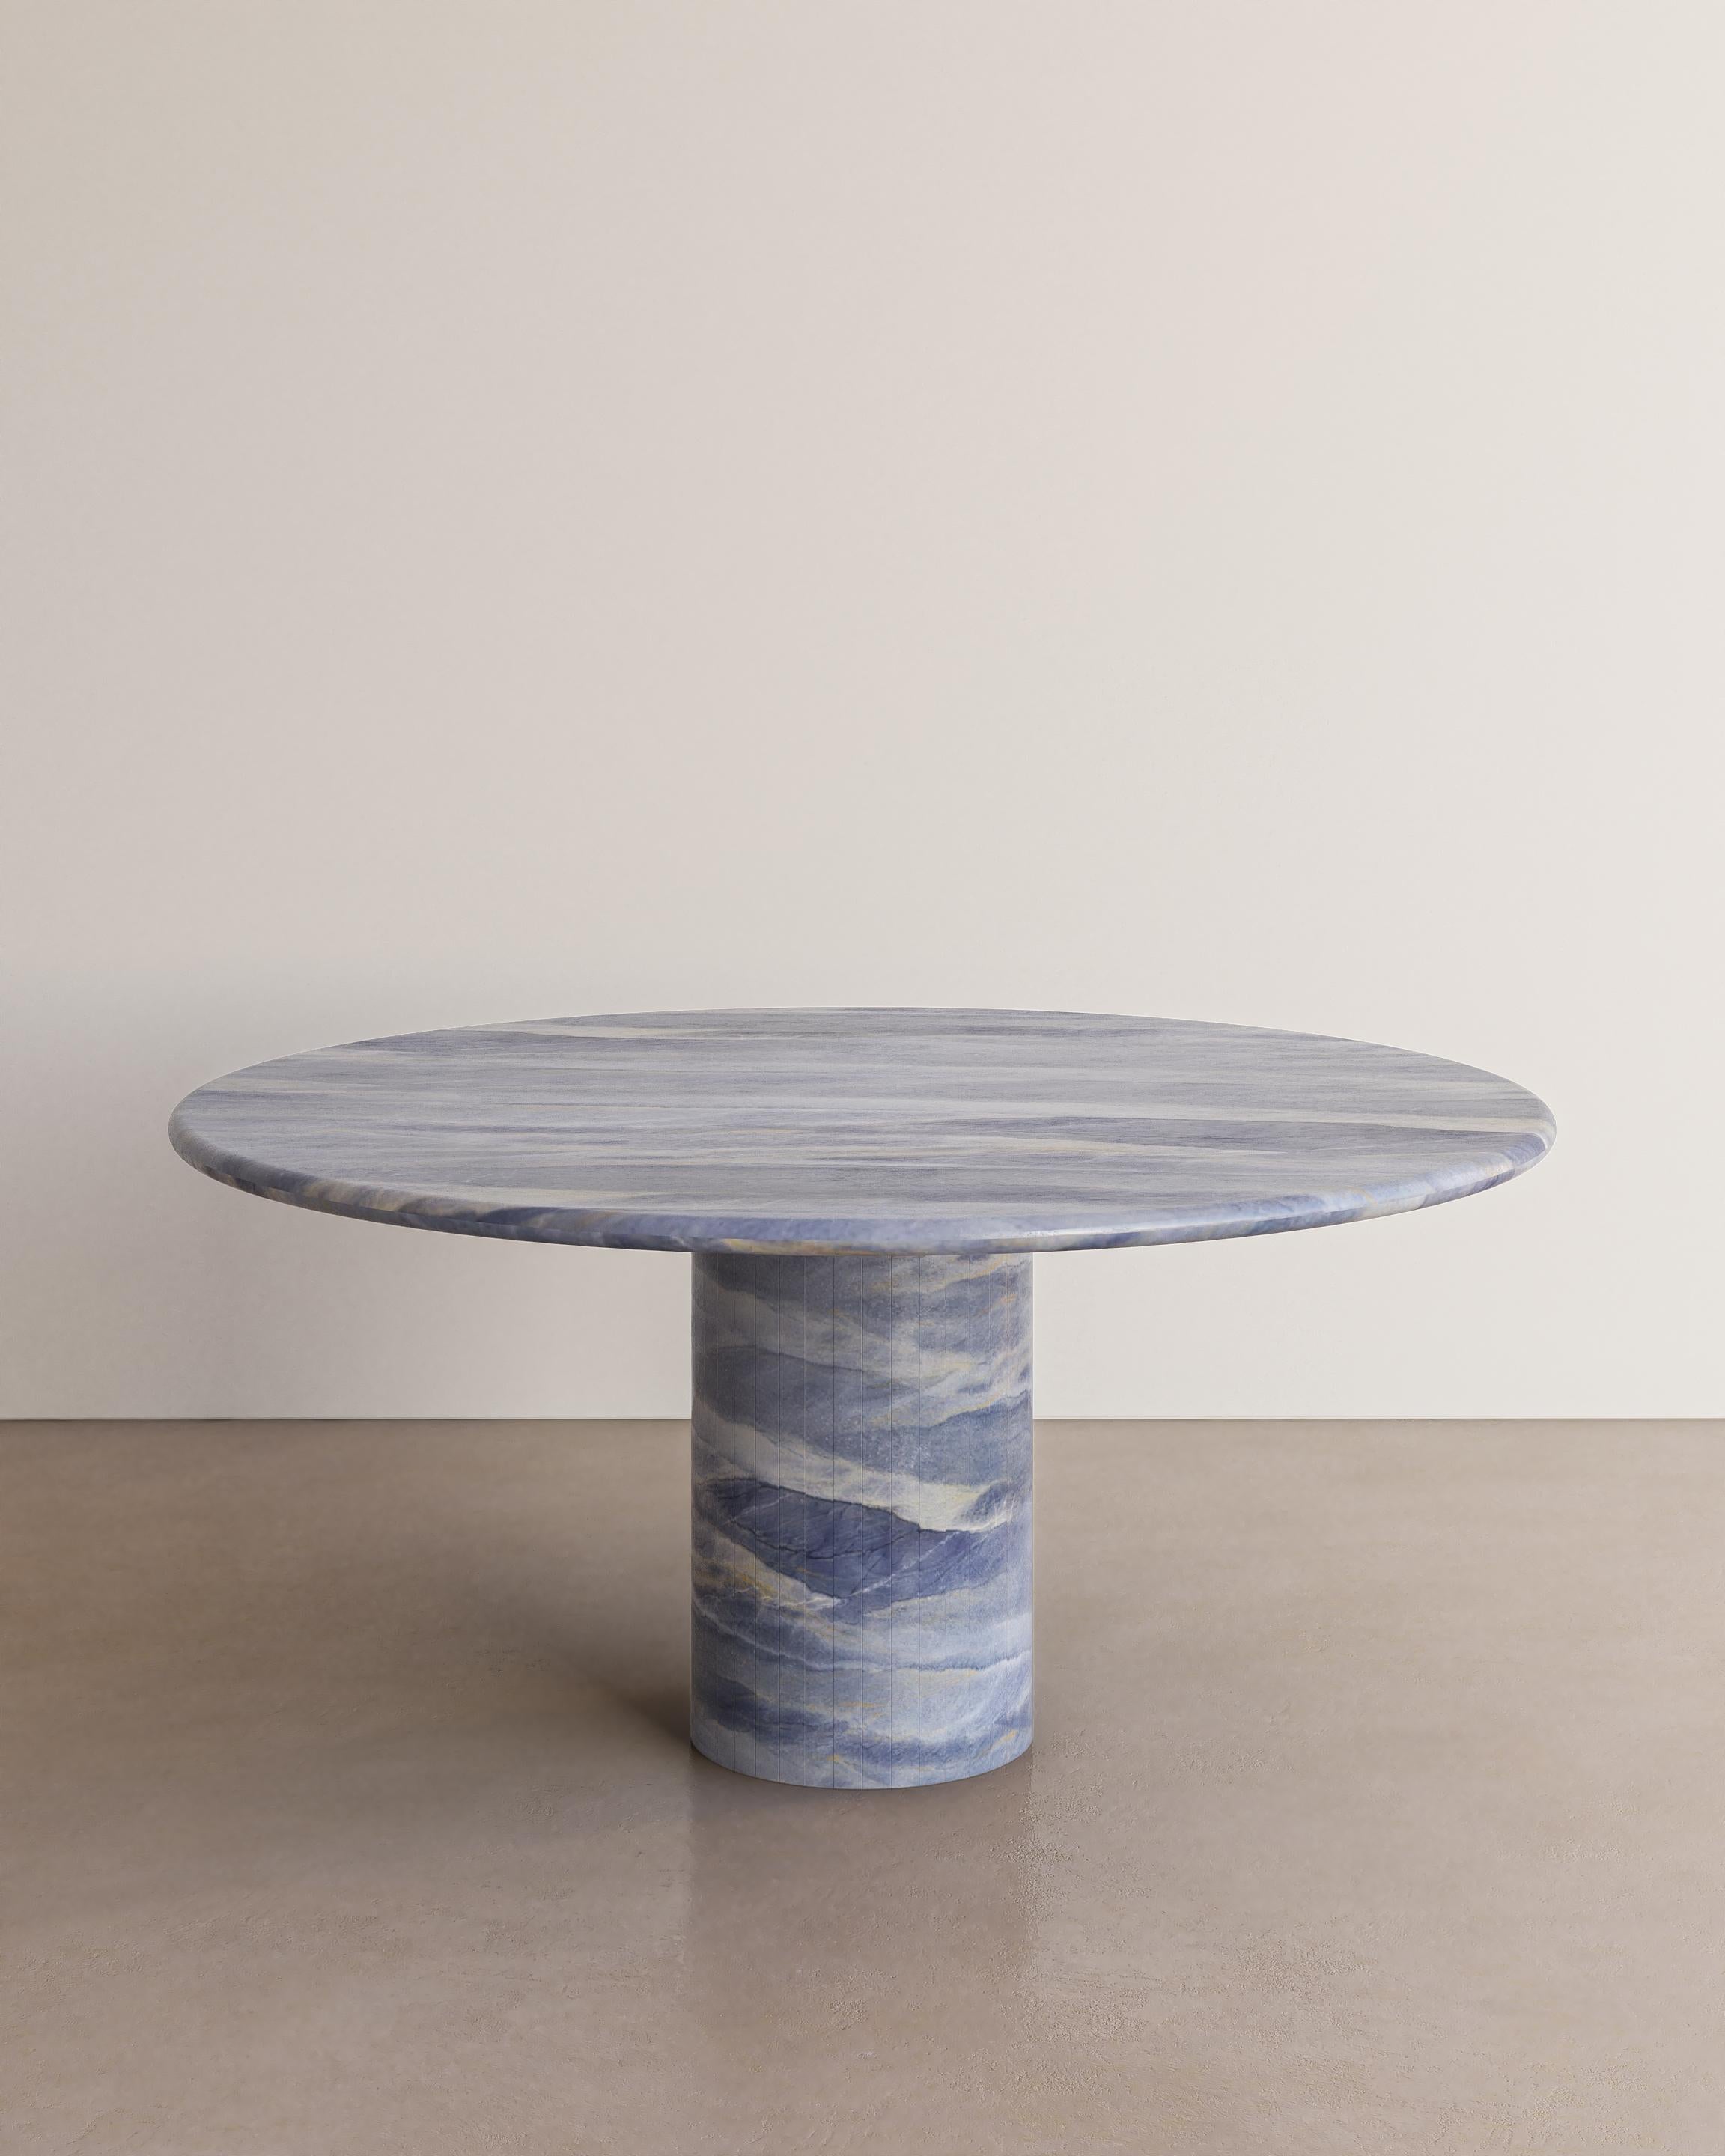 The Voyage Dining Table I in La Mer Quartzite sourced in Brazil with a polished finish by The Essentialist celebrates the simple pleasures that define life and replenish the soul through harnessing essential form. Envisioned as an ode to historical